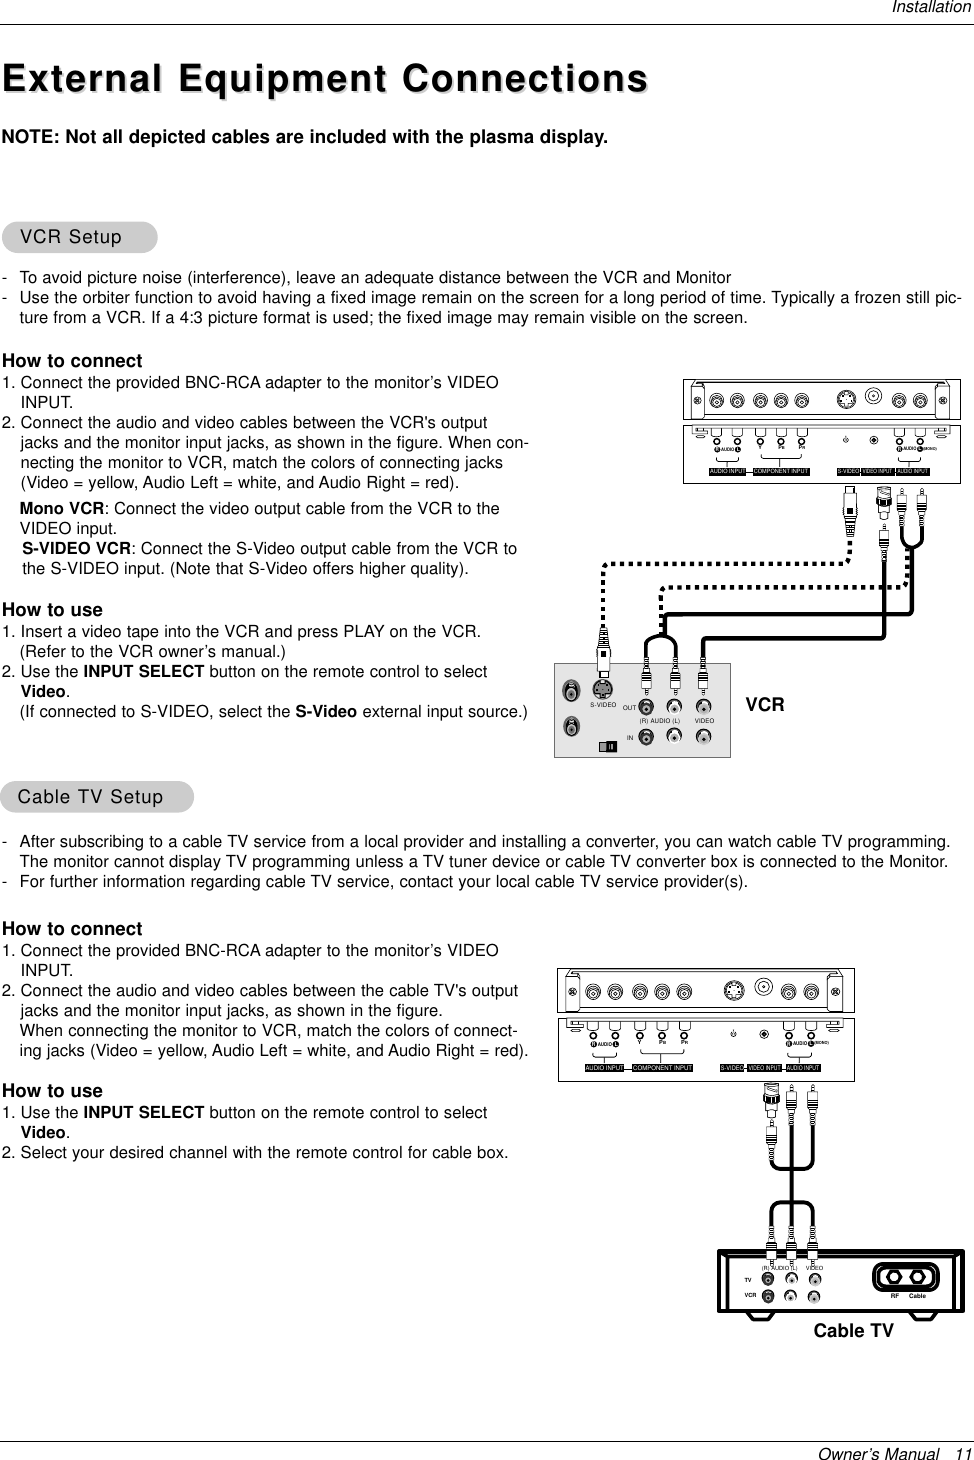 Owner’s Manual   11InstallationExternal Equipment ConnectionsExternal Equipment ConnectionsNOTE: Not all depicted cables are included with the plasma display.- To avoid picture noise (interference), leave an adequate distance between the VCR and Monitor- Use the orbiter function to avoid having a fixed image remain on the screen for a long period of time. Typically a frozen still pic-ture from a VCR. If a 4:3 picture format is used; the fixed image may remain visible on the screen.How to connect1. Connect the provided BNC-RCA adapter to the monitor’s VIDEOINPUT.2. Connect the audio and video cables between the VCR&apos;s outputjacks and the monitor input jacks, as shown in the figure. When con-necting the monitor to VCR, match the colors of connecting jacks(Video = yellow, Audio Left = white, and Audio Right = red).Mono VCR: Connect the video output cable from the VCR to theVIDEO input.S-VIDEO VCR: Connect the S-Video output cable from the VCR tothe S-VIDEO input. (Note that S-Video offers higher quality).How to use1. Insert a video tape into the VCR and press PLAY on the VCR. (Refer to the VCR owner’s manual.) 2. Use the INPUT SELECT button on the remote control to selectVideo.(If connected to S-VIDEO, select the S-Video external input source.)VCR SetupVCR SetupS-VIDEO OUTIN(R) AUDIO (L) VIDEOYPBPR(MONO)RAUDIOLRAUDIOLS-VIDEOAUDIO INPUTVIDEO INPUTAUDIO INPUT COMPONENT INPUT- After subscribing to a cable TV service from a local provider and installing a converter, you can watch cable TV programming.The monitor cannot display TV programming unless a TV tuner device or cable TV converter box is connected to the Monitor.- For further information regarding cable TV service, contact your local cable TV service provider(s).How to connect1. Connect the provided BNC-RCA adapter to the monitor’s VIDEOINPUT.2. Connect the audio and video cables between the cable TV&apos;s outputjacks and the monitor input jacks, as shown in the figure. When connecting the monitor to VCR, match the colors of connect-ing jacks (Video = yellow, Audio Left = white, and Audio Right = red).How to use1. Use the INPUT SELECT button on the remote control to selectVideo.2. Select your desired channel with the remote control for cable box.Cable Cable TV SetupTV SetupTVVCR RF Cable (R) AUDIO (L) VIDEOYPBPR(MONO)RAUDIOLRAUDIOLS-VIDEOAUDIO INPUTVIDEO INPUTAUDIO INPUTCOMPONENT INPUTVCRCable TV